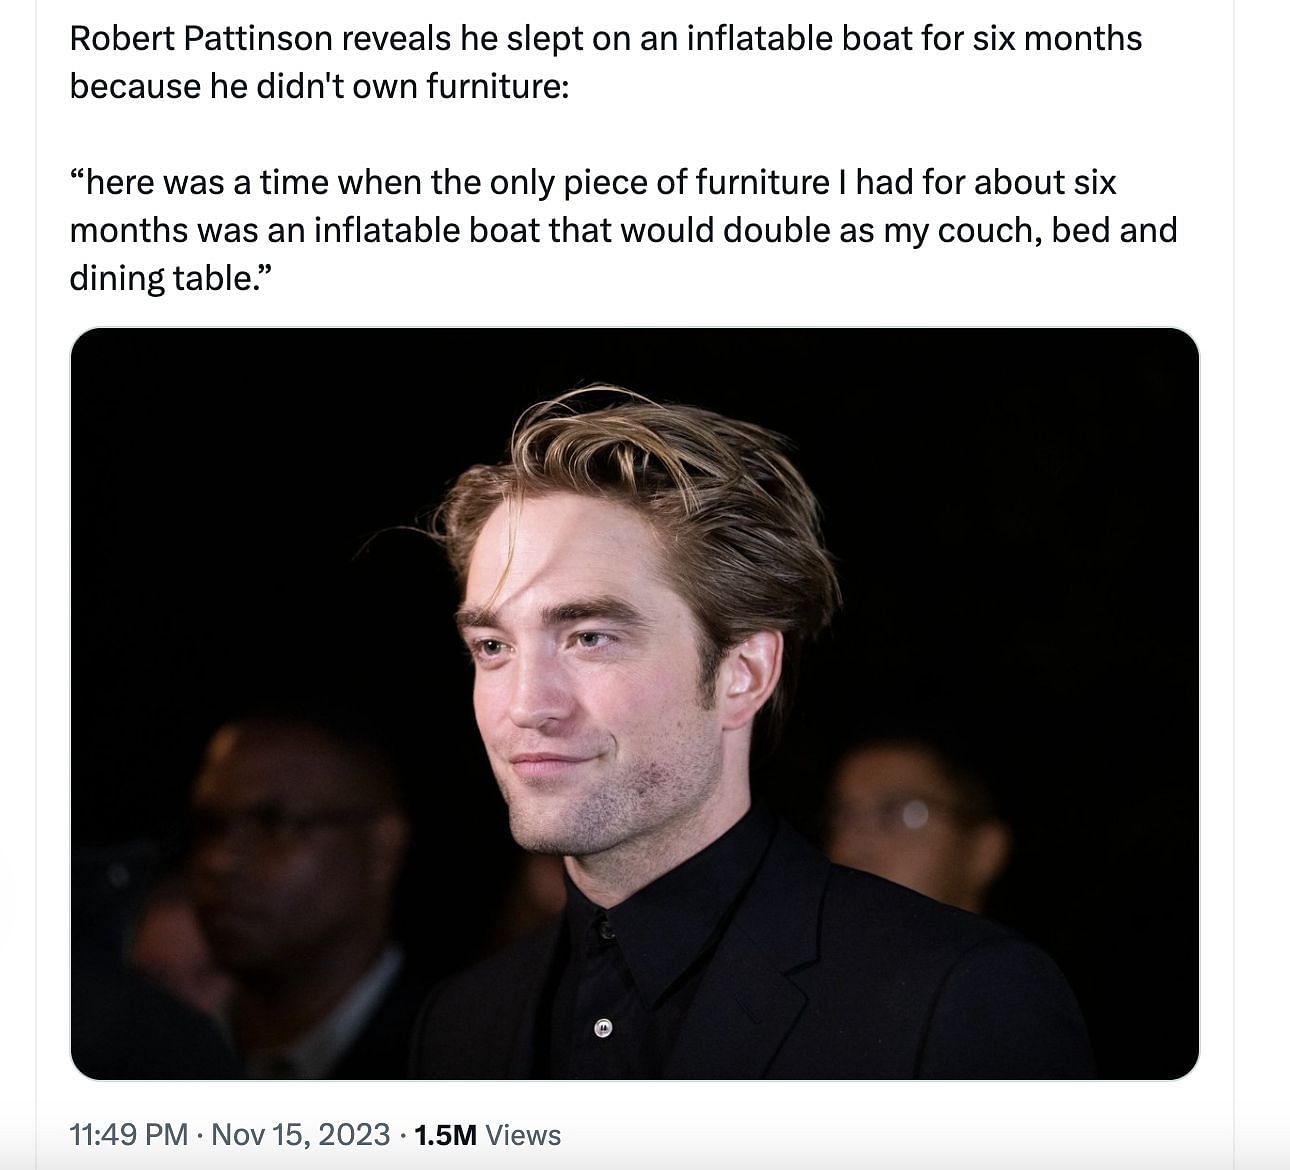 Social media users reacted to Pattinson&#039;s claims about sleeping on an inflatable boat for 6 months. (Image via Twitter)